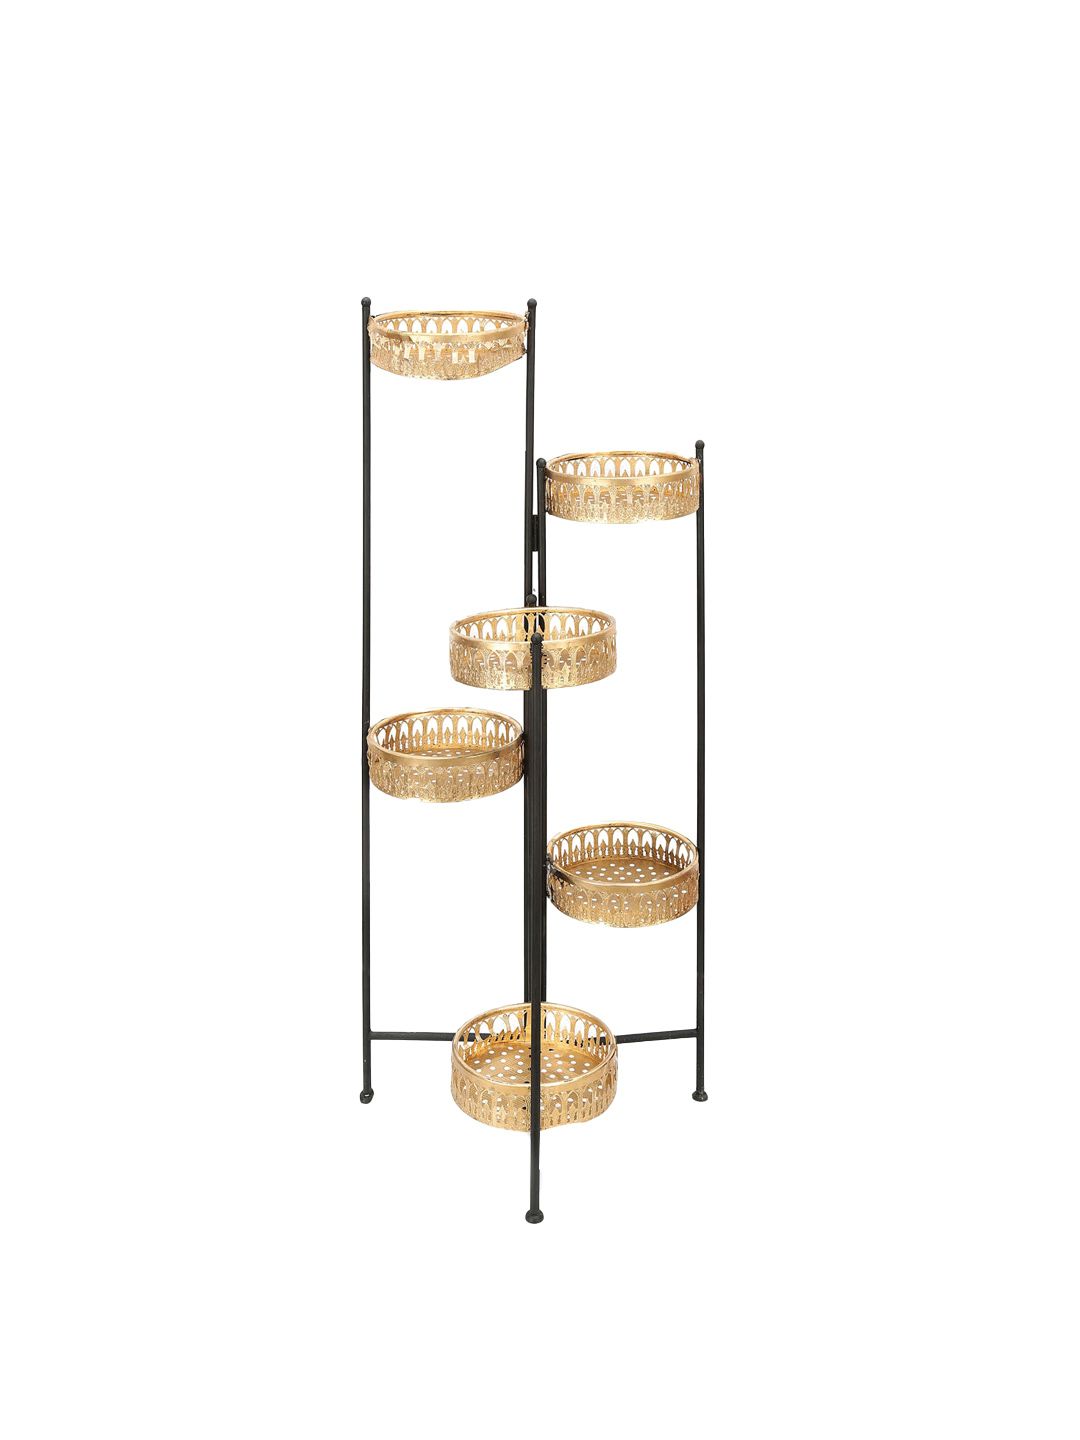 Athome by Nilkamal Gold-Toned & Black Adjustable Planter Price in India